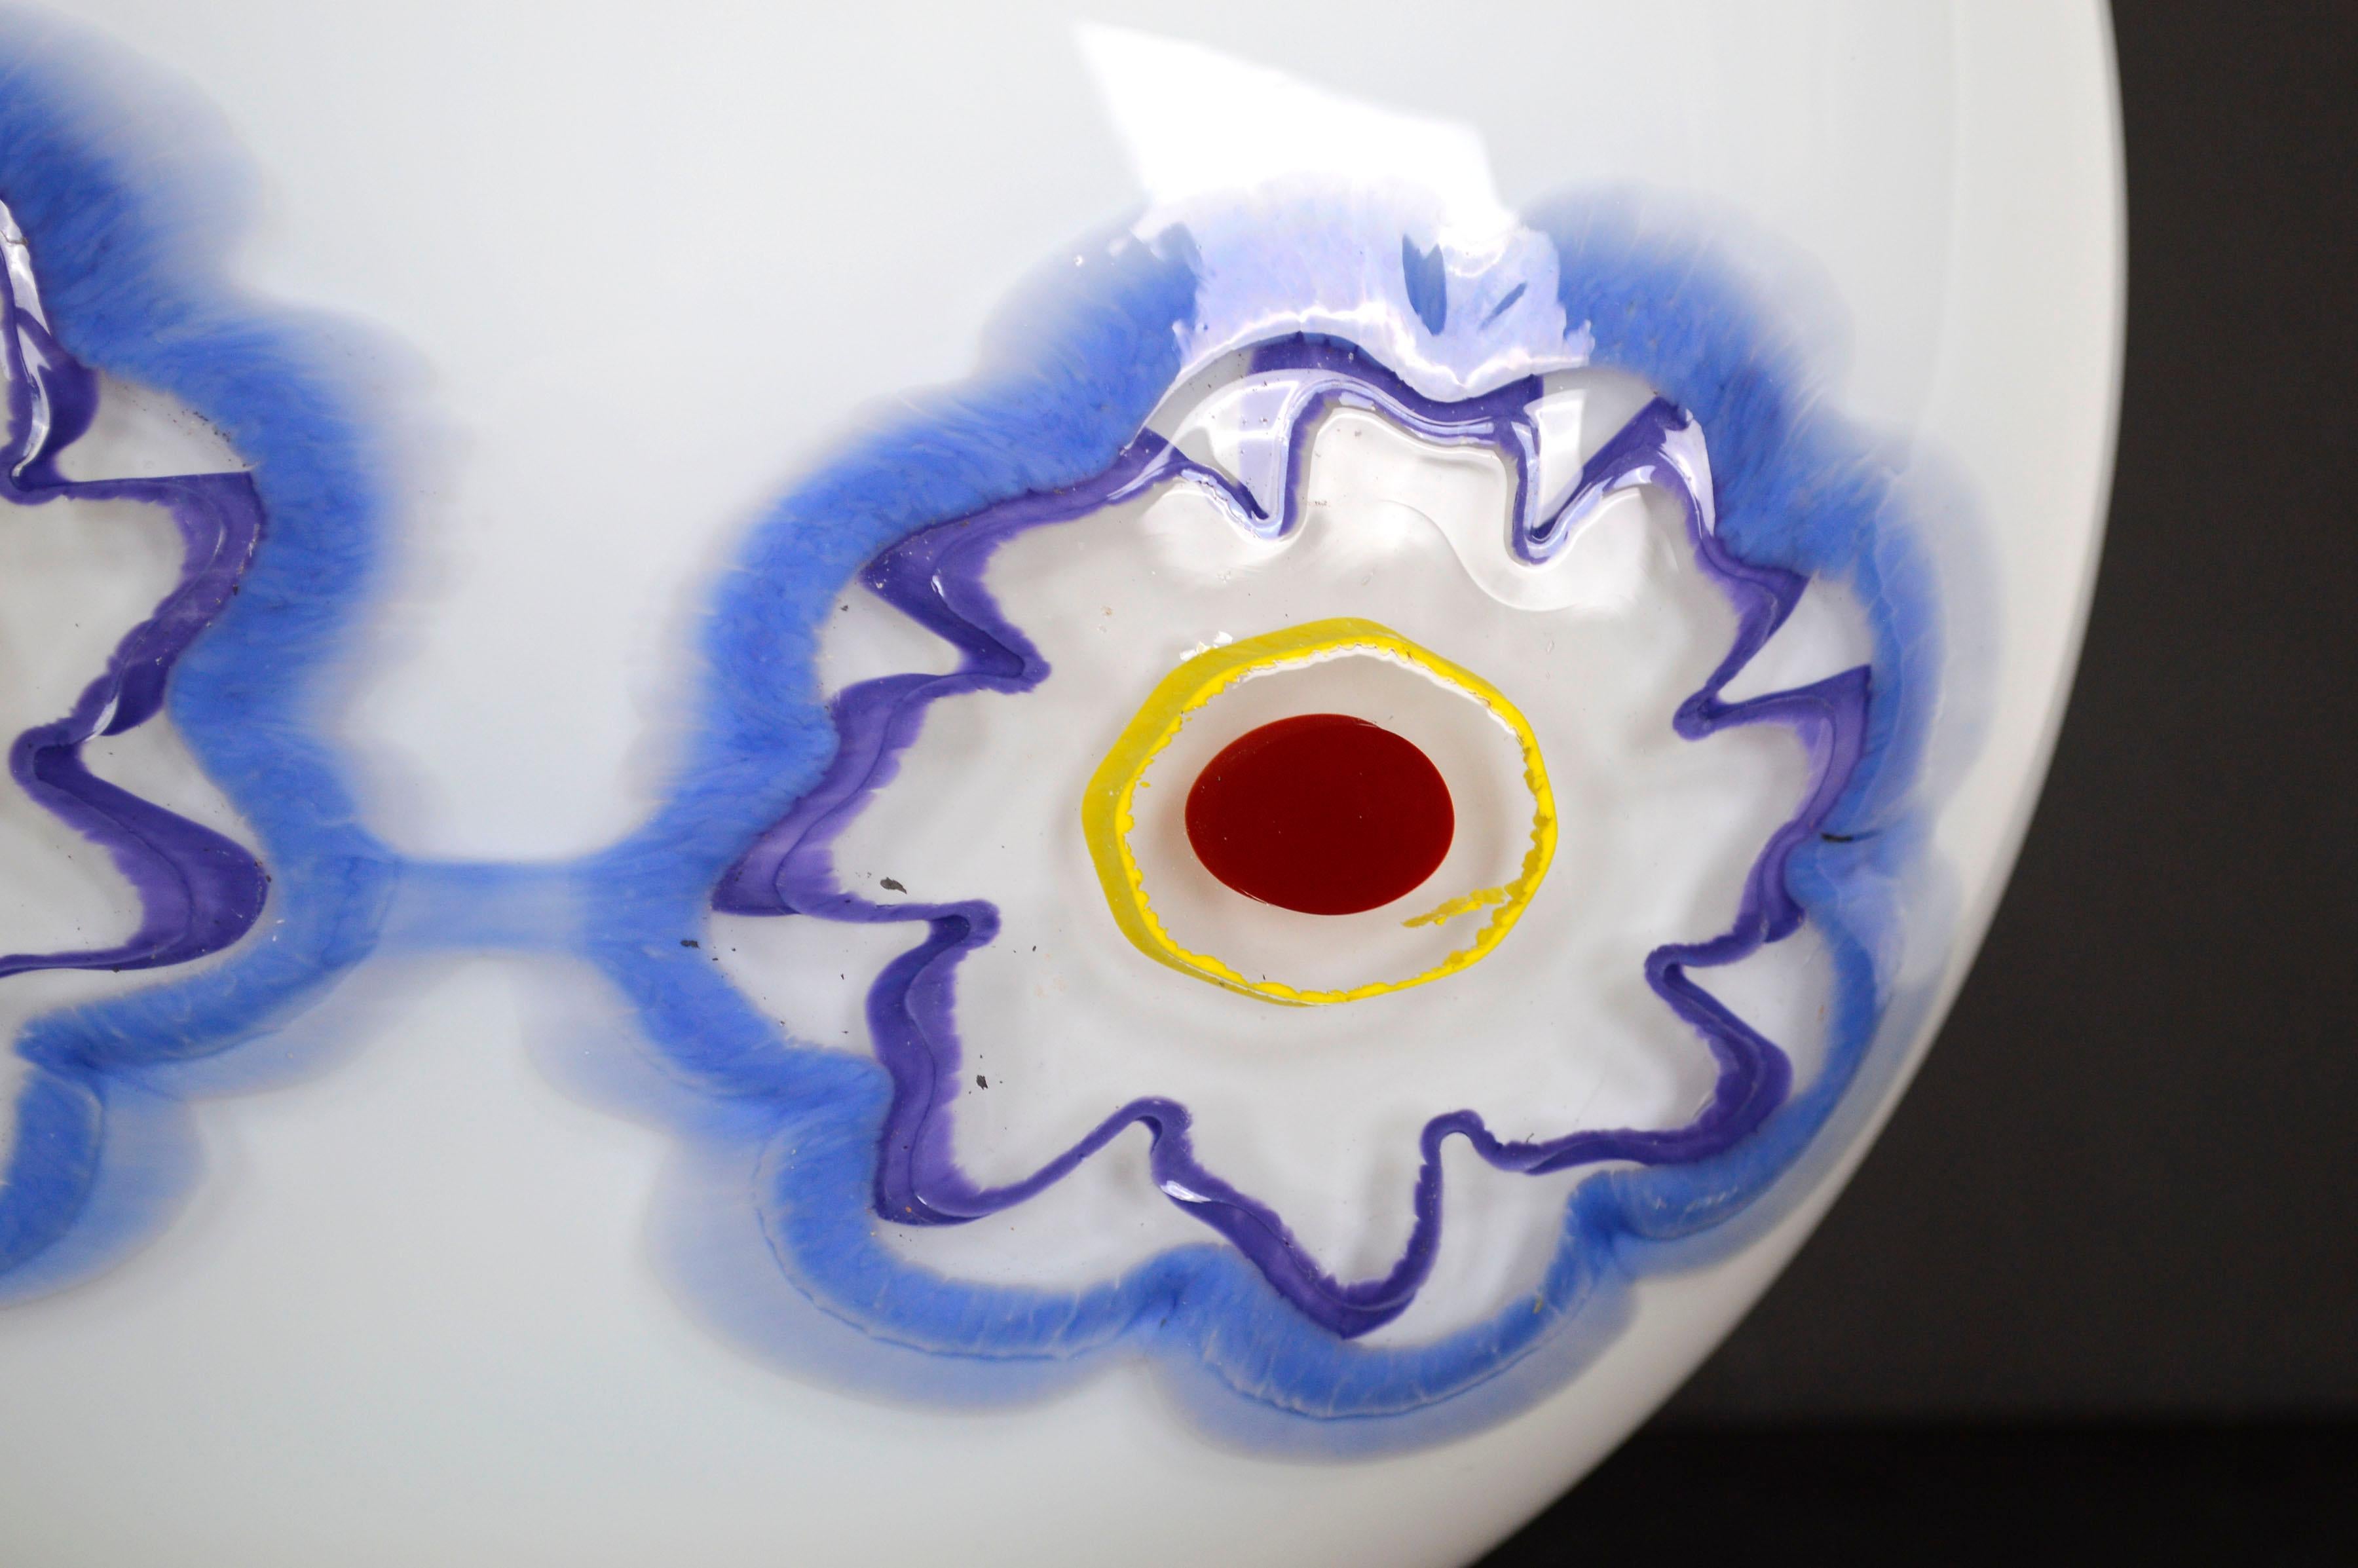 Wonderfully modern white blown glass vase with two blue flowers and red rim by Nadine Saylor (American, 20th Century), 2005. Signed and dated on bottom. Condition: Excellent. Measures 9.5